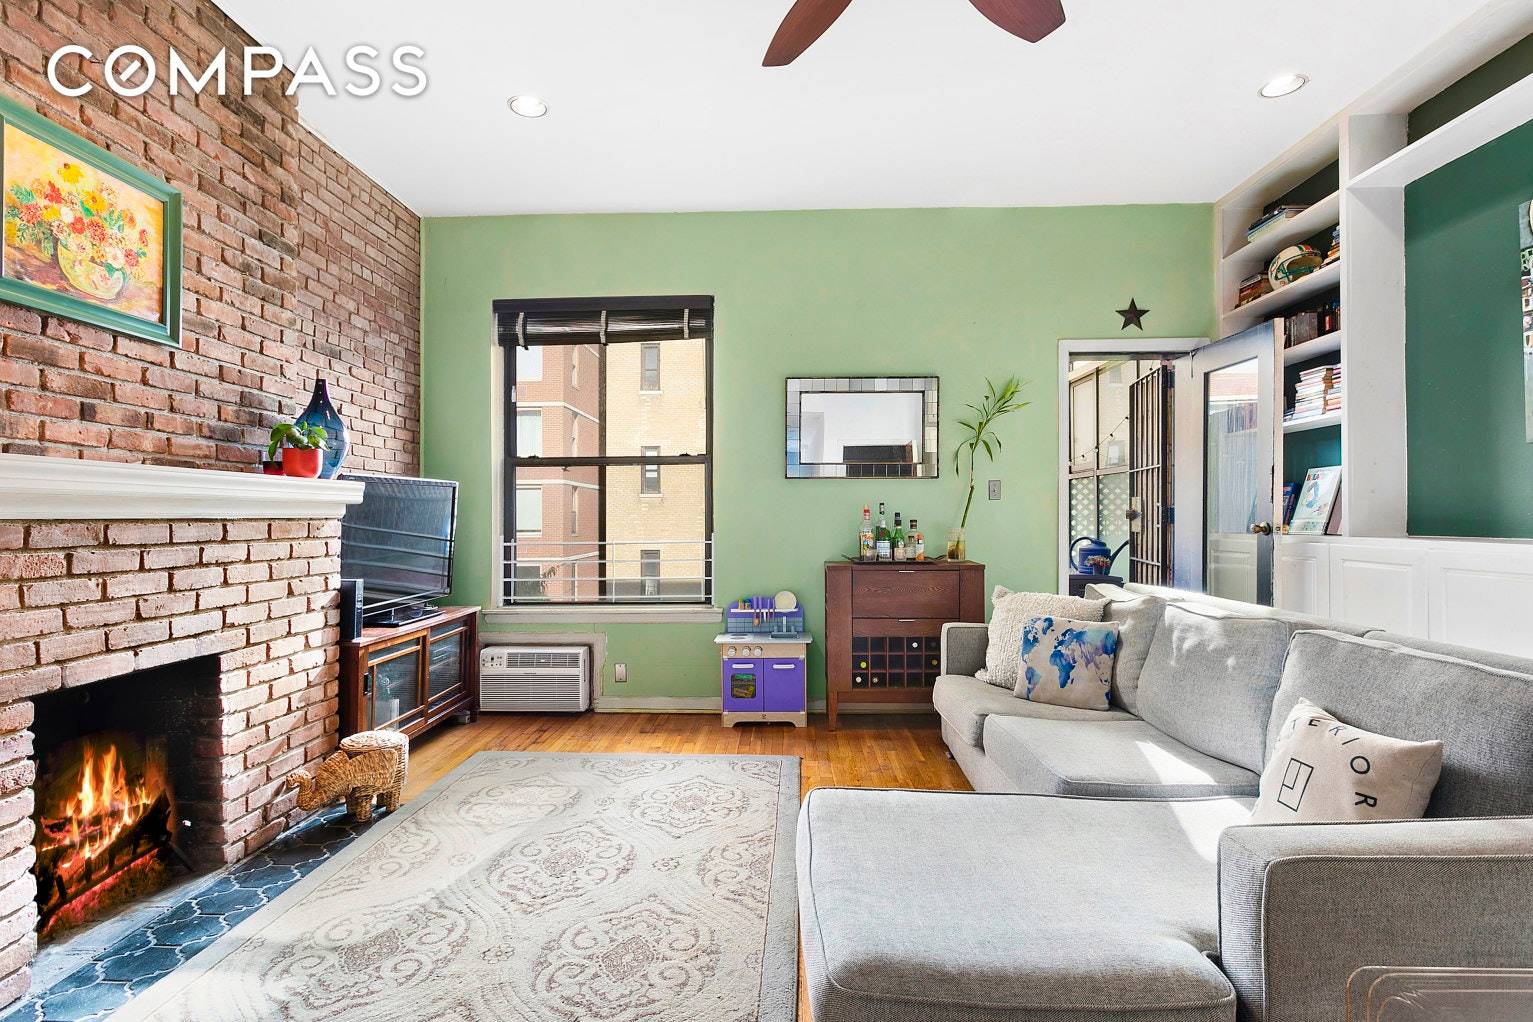 TERRACED TOWNHOUSETHIS IS A JUMBO FLOOR THROUGH 1 BEDROOMWOOD BURNING FIREPLACE PRIVATE TERRACE SOULFUL BROWNSTONE BEAUTYAfter a hectic day conquering Gotham, you need to relax you need a peaceful, inspiring, ...